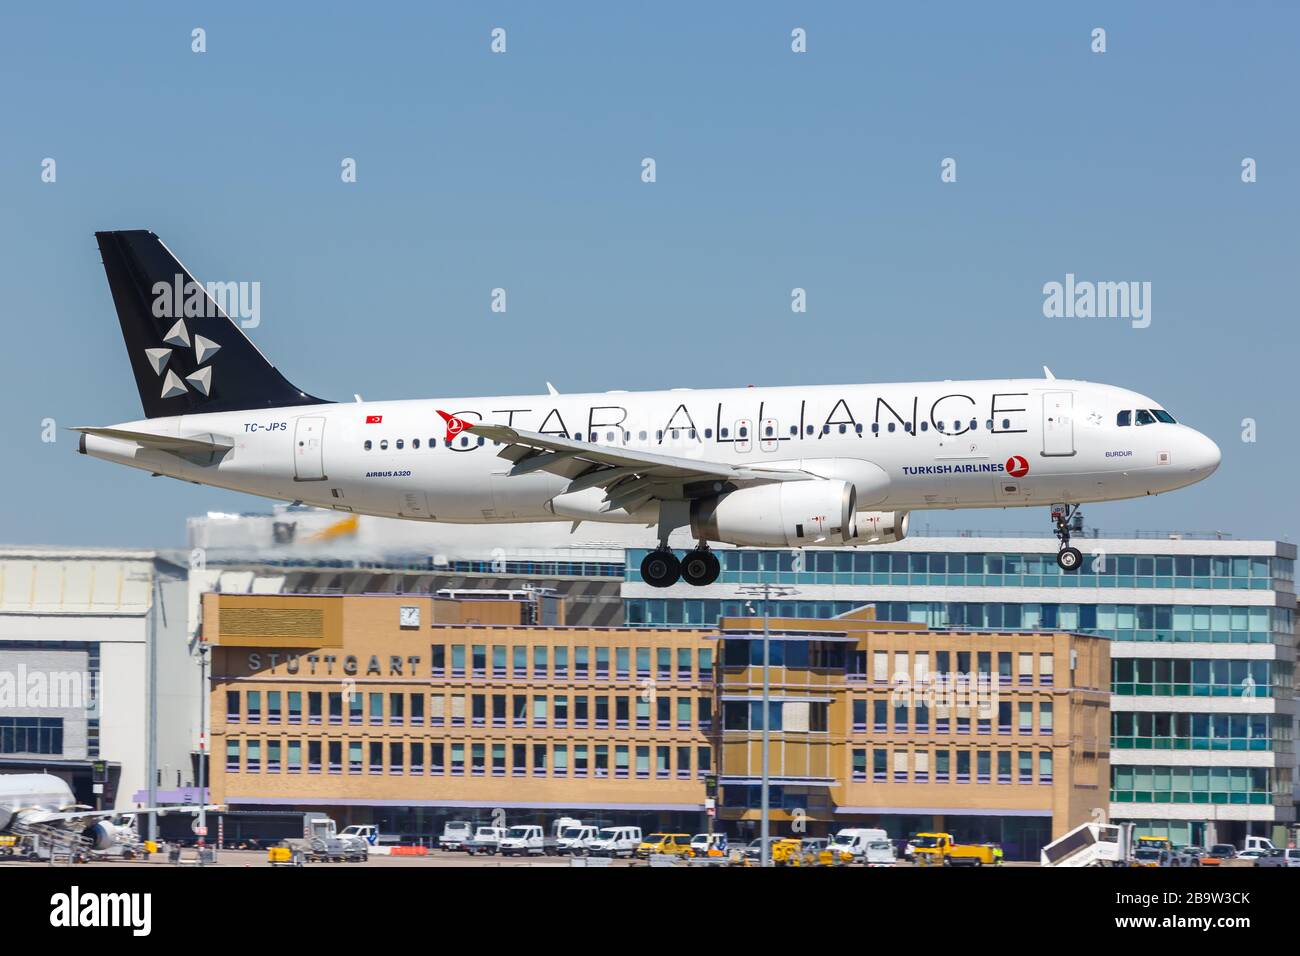 Stuttgart, Germany – May 8, 2018: Turkish Airlines Airbus A320 airplane at Stuttgart airport (STR) in Germany. Airbus is a European aircraft manufactu Stock Photo